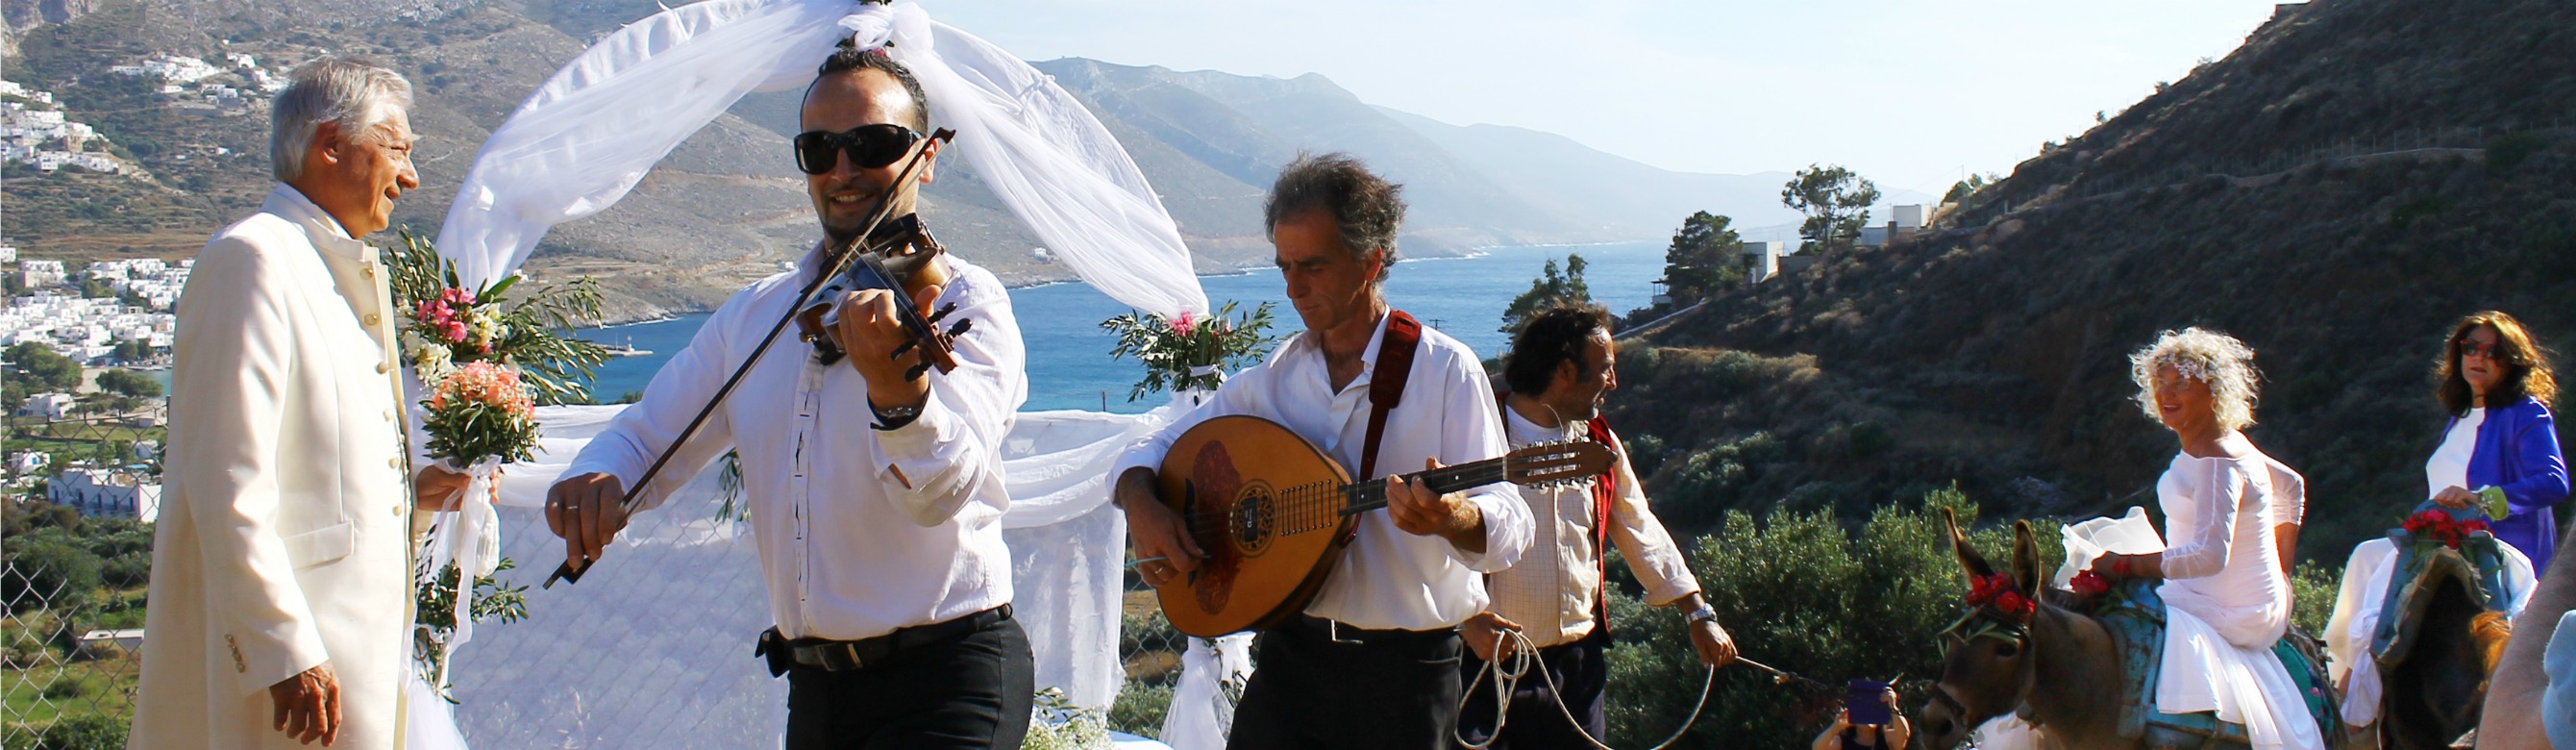 Book your wedding day in St. Nicholas Chapel Amorgos